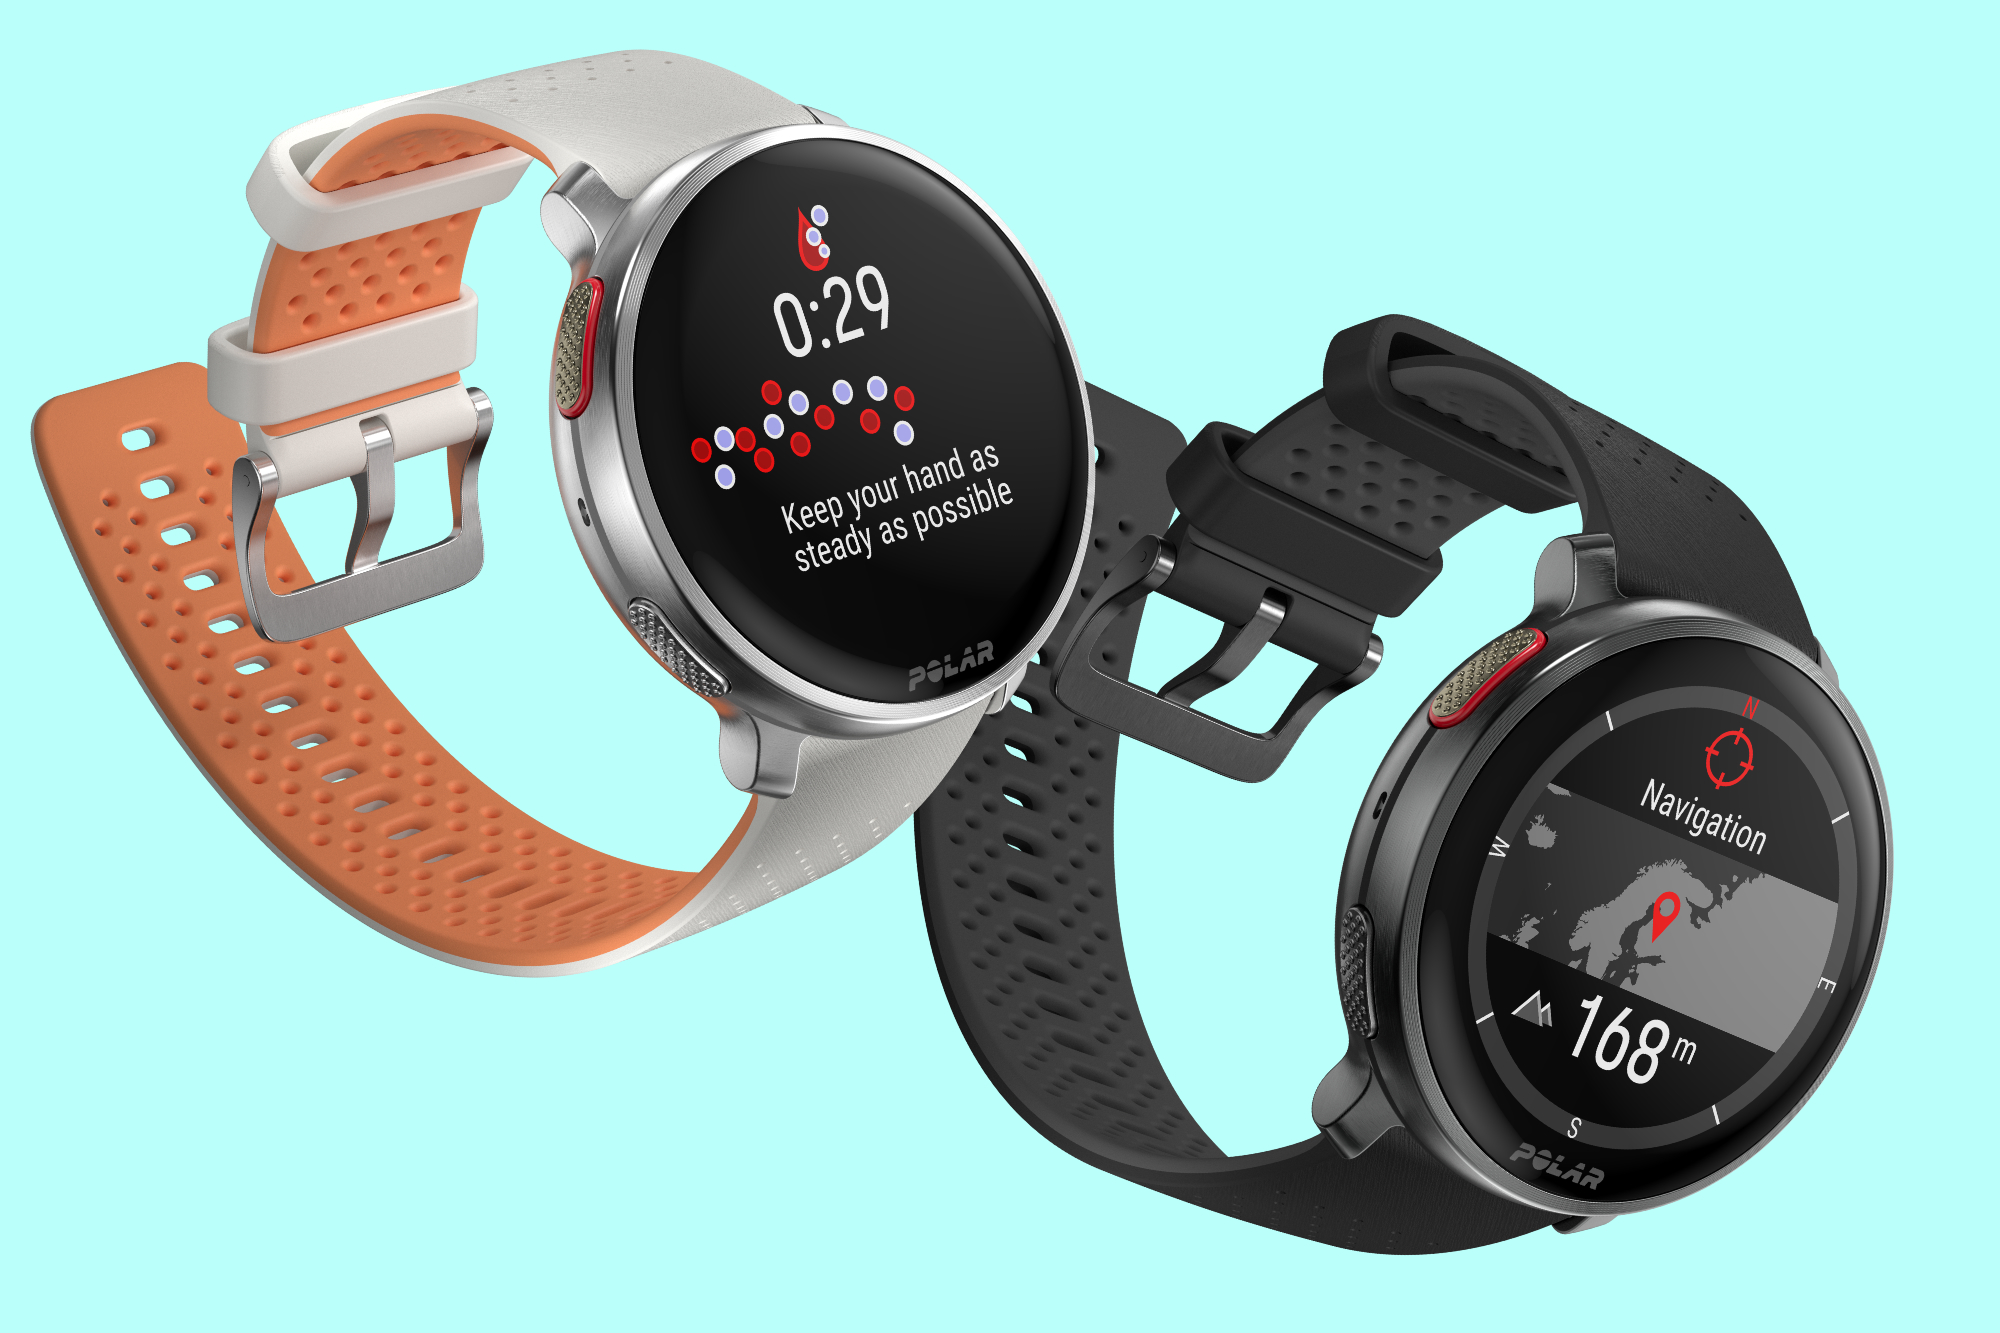 Polar Vantage V2 Smartwatch Review: Training Tests Give Greater Fitness  Insight